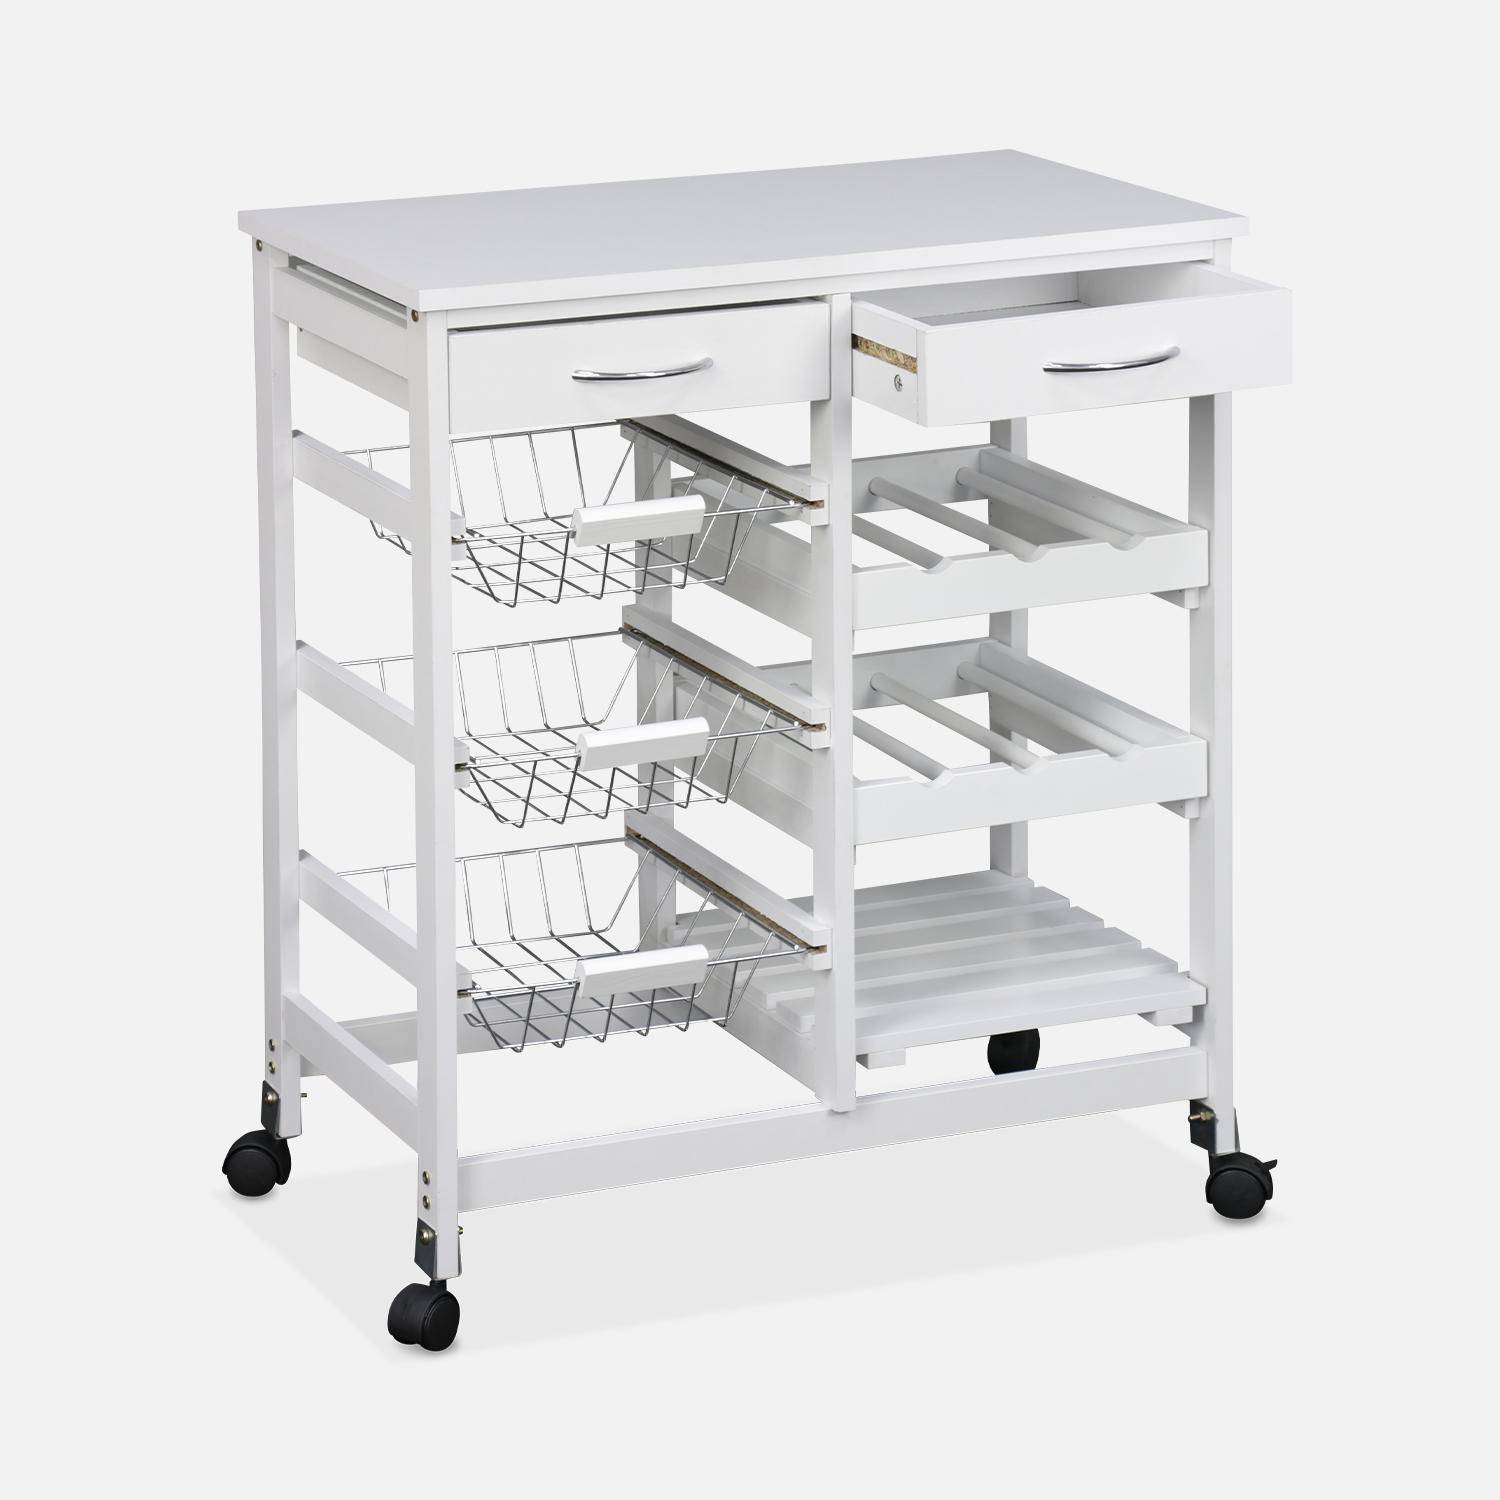 Wood-Effect Kitchen Cart with Wheels - 65x35 cm, white Photo5